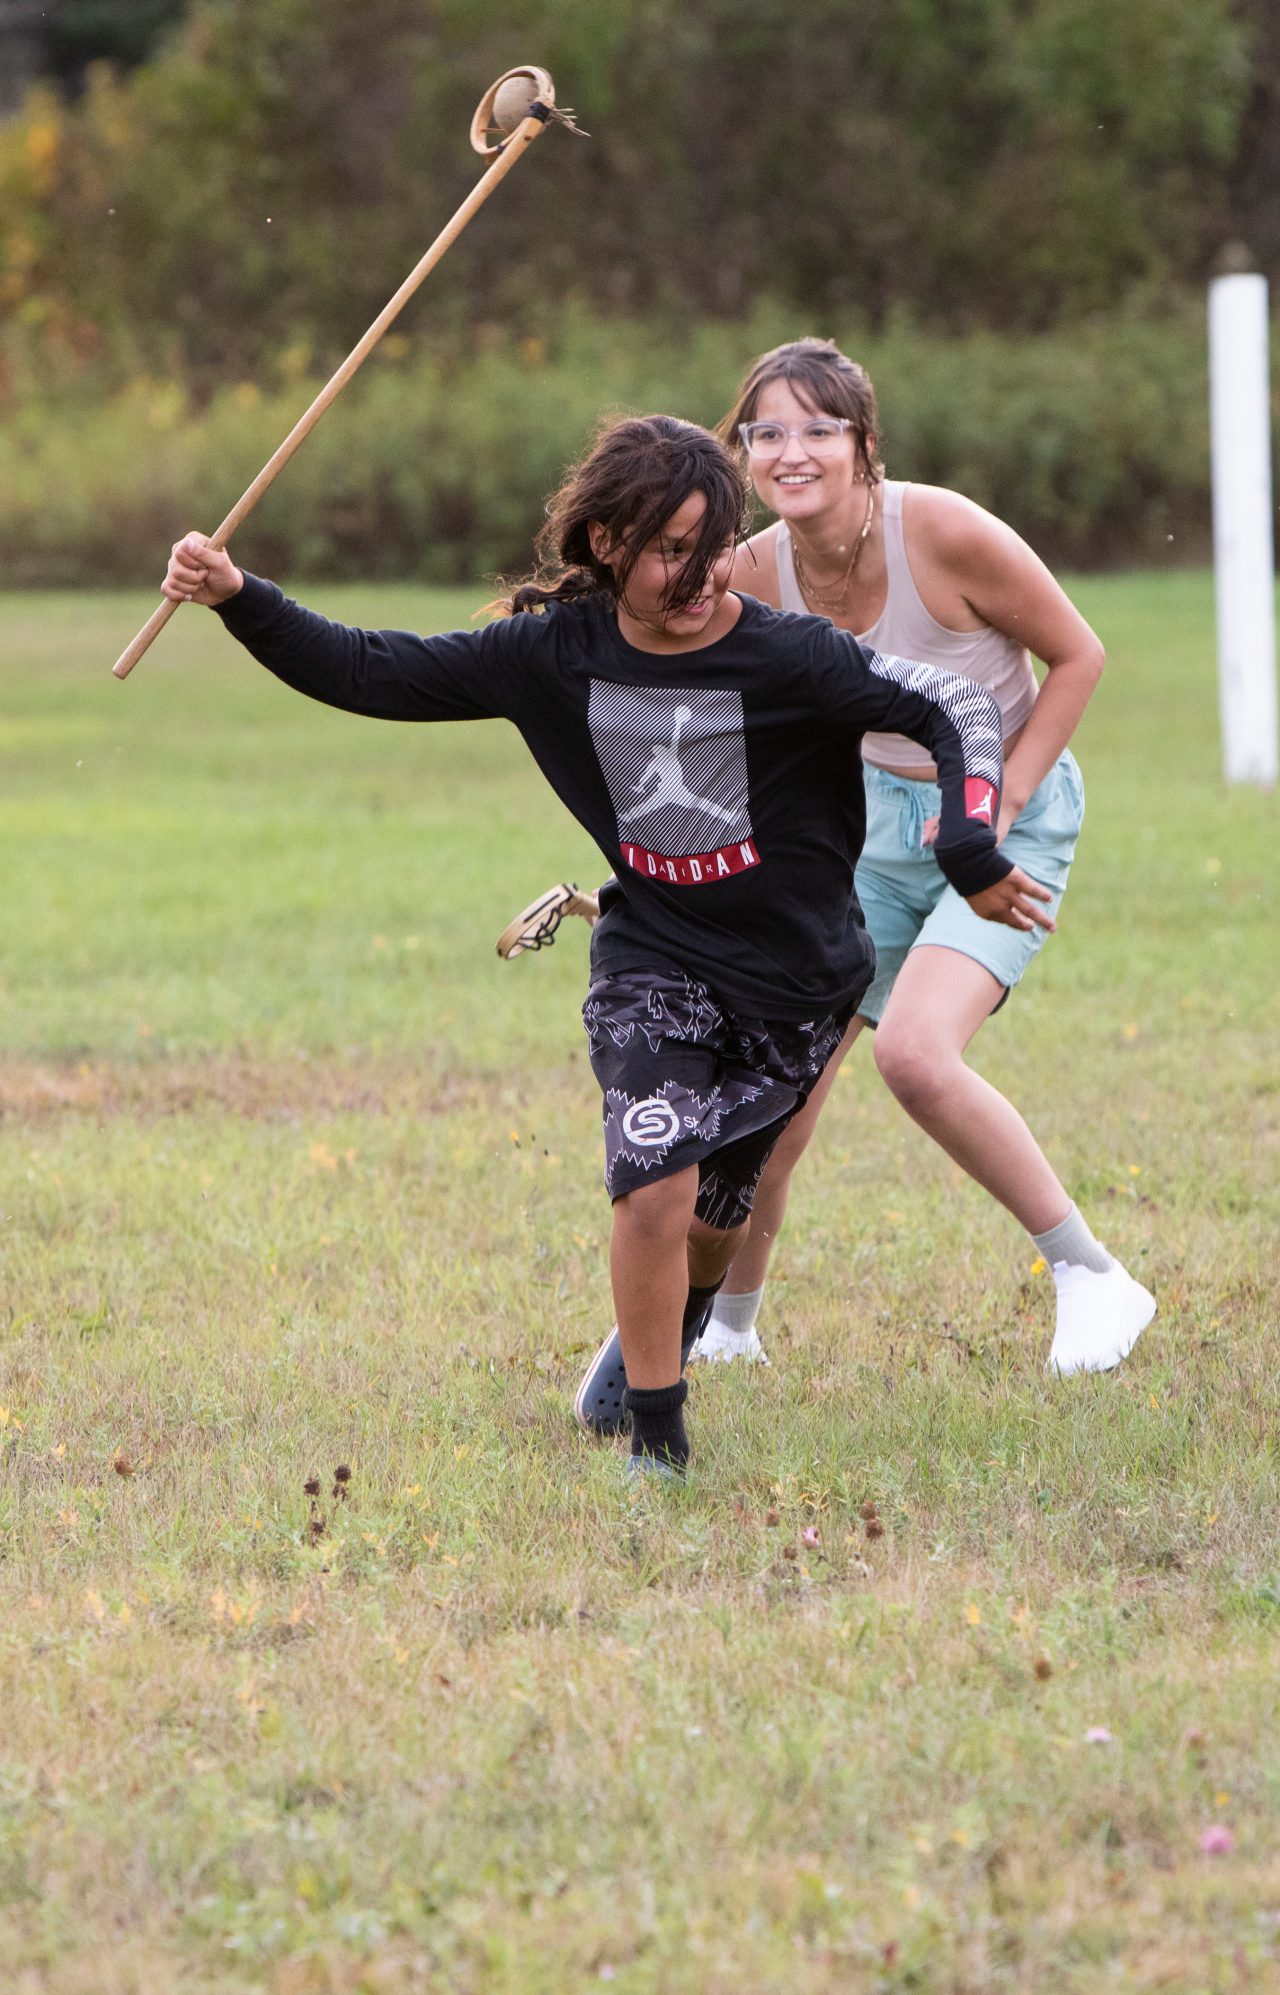 A group of people running on a field with large sticks in their hands.